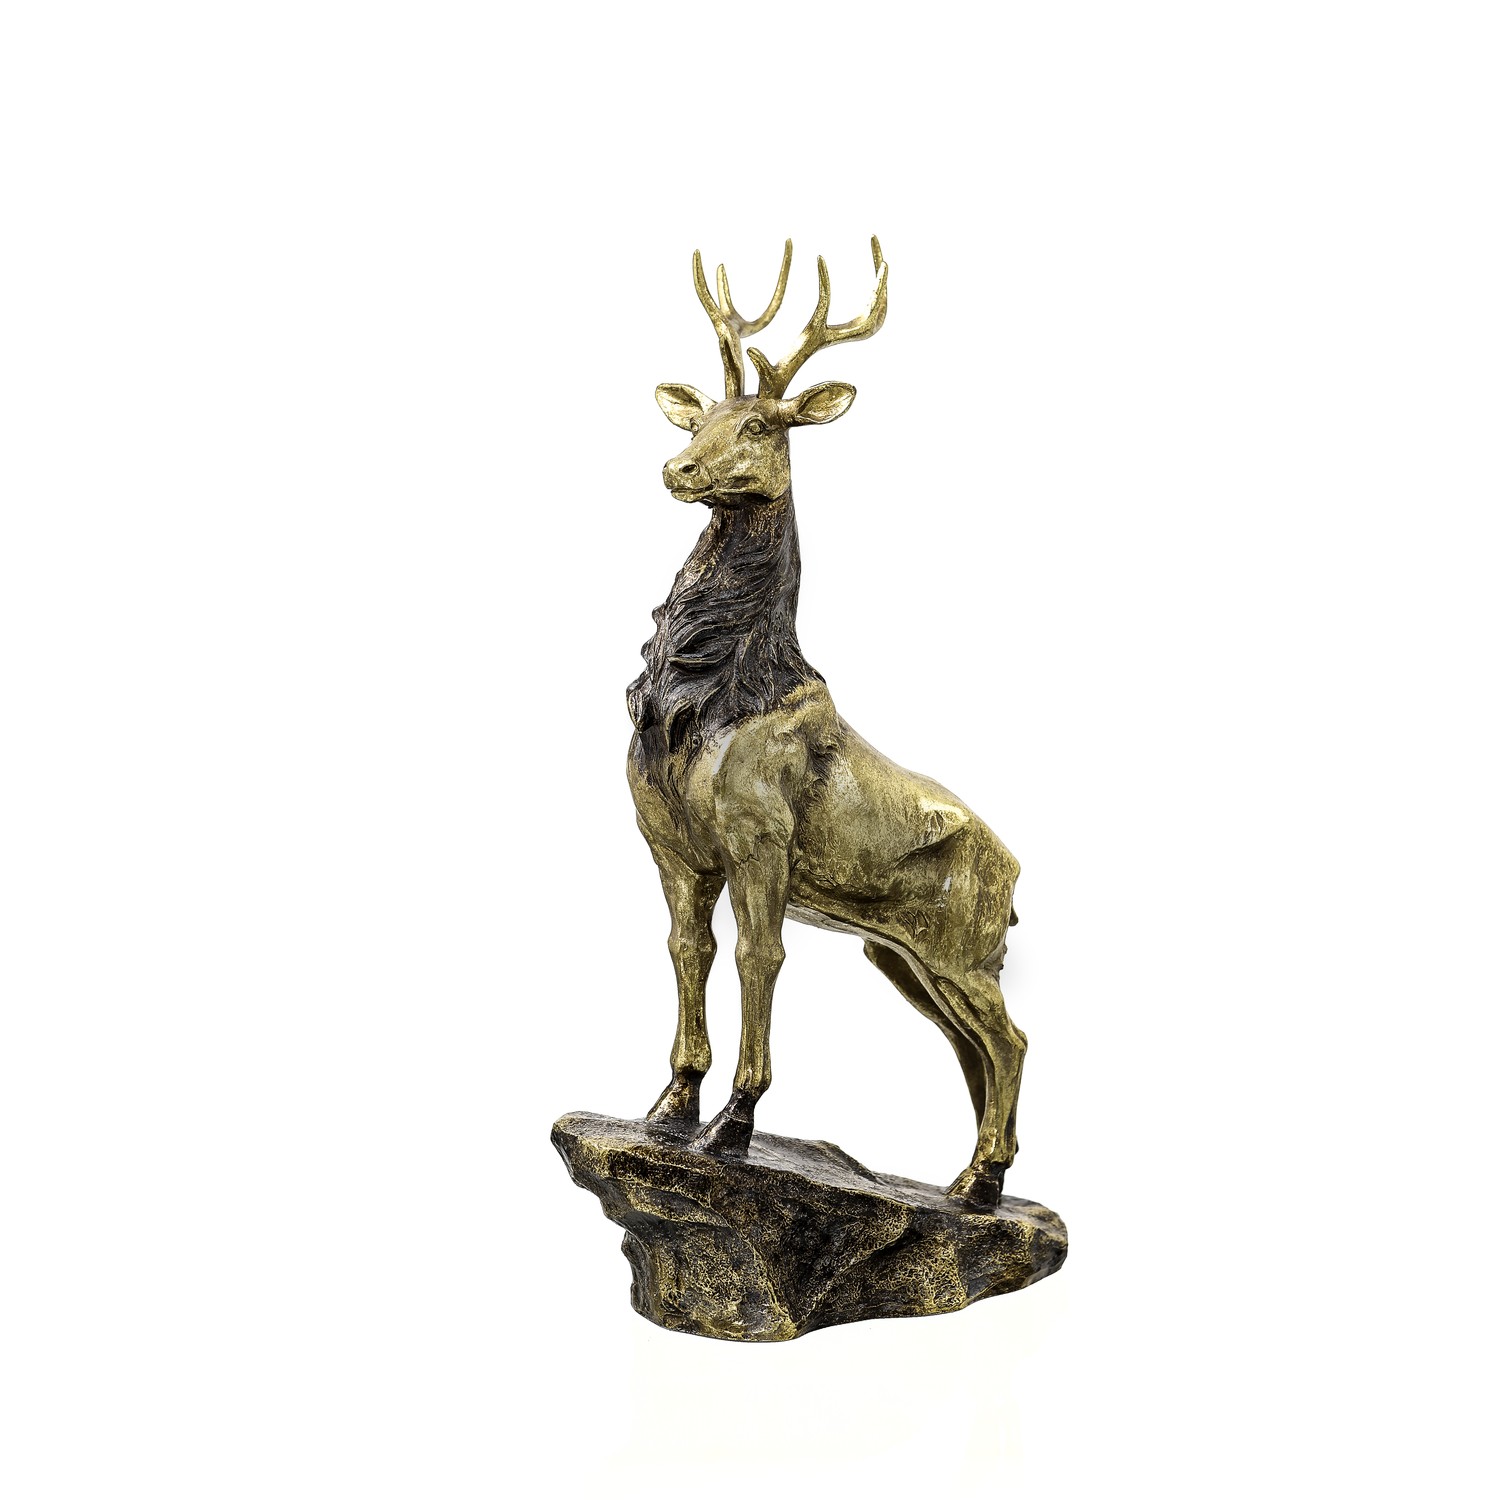 Large Gold Standing Stag Ornament - Image 1